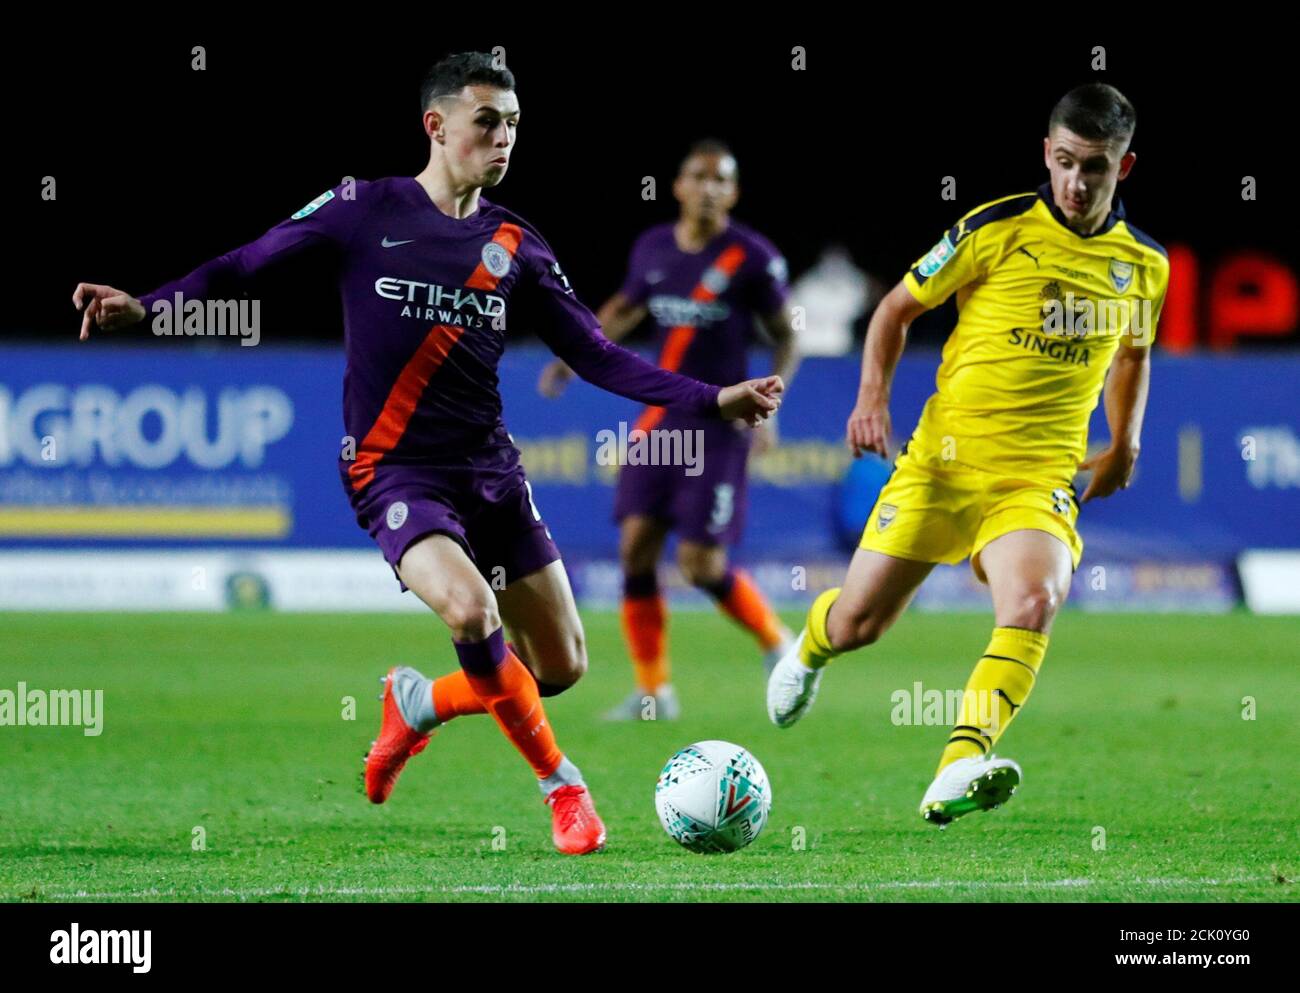 Soccer Football - Carabao Cup - Third Round - Oxford United v Manchester City - Kassam Stadium, Oxford, Britain - September 25, 2018  Manchester City's Phil Foden in action with Oxford United's Cameron Brannagan   REUTERS/Eddie Keogh  EDITORIAL USE ONLY. No use with unauthorized audio, video, data, fixture lists, club/league logos or 'live' services. Online in-match use limited to 75 images, no video emulation. No use in betting, games or single club/league/player publications.  Please contact your account representative for further details. Stock Photo